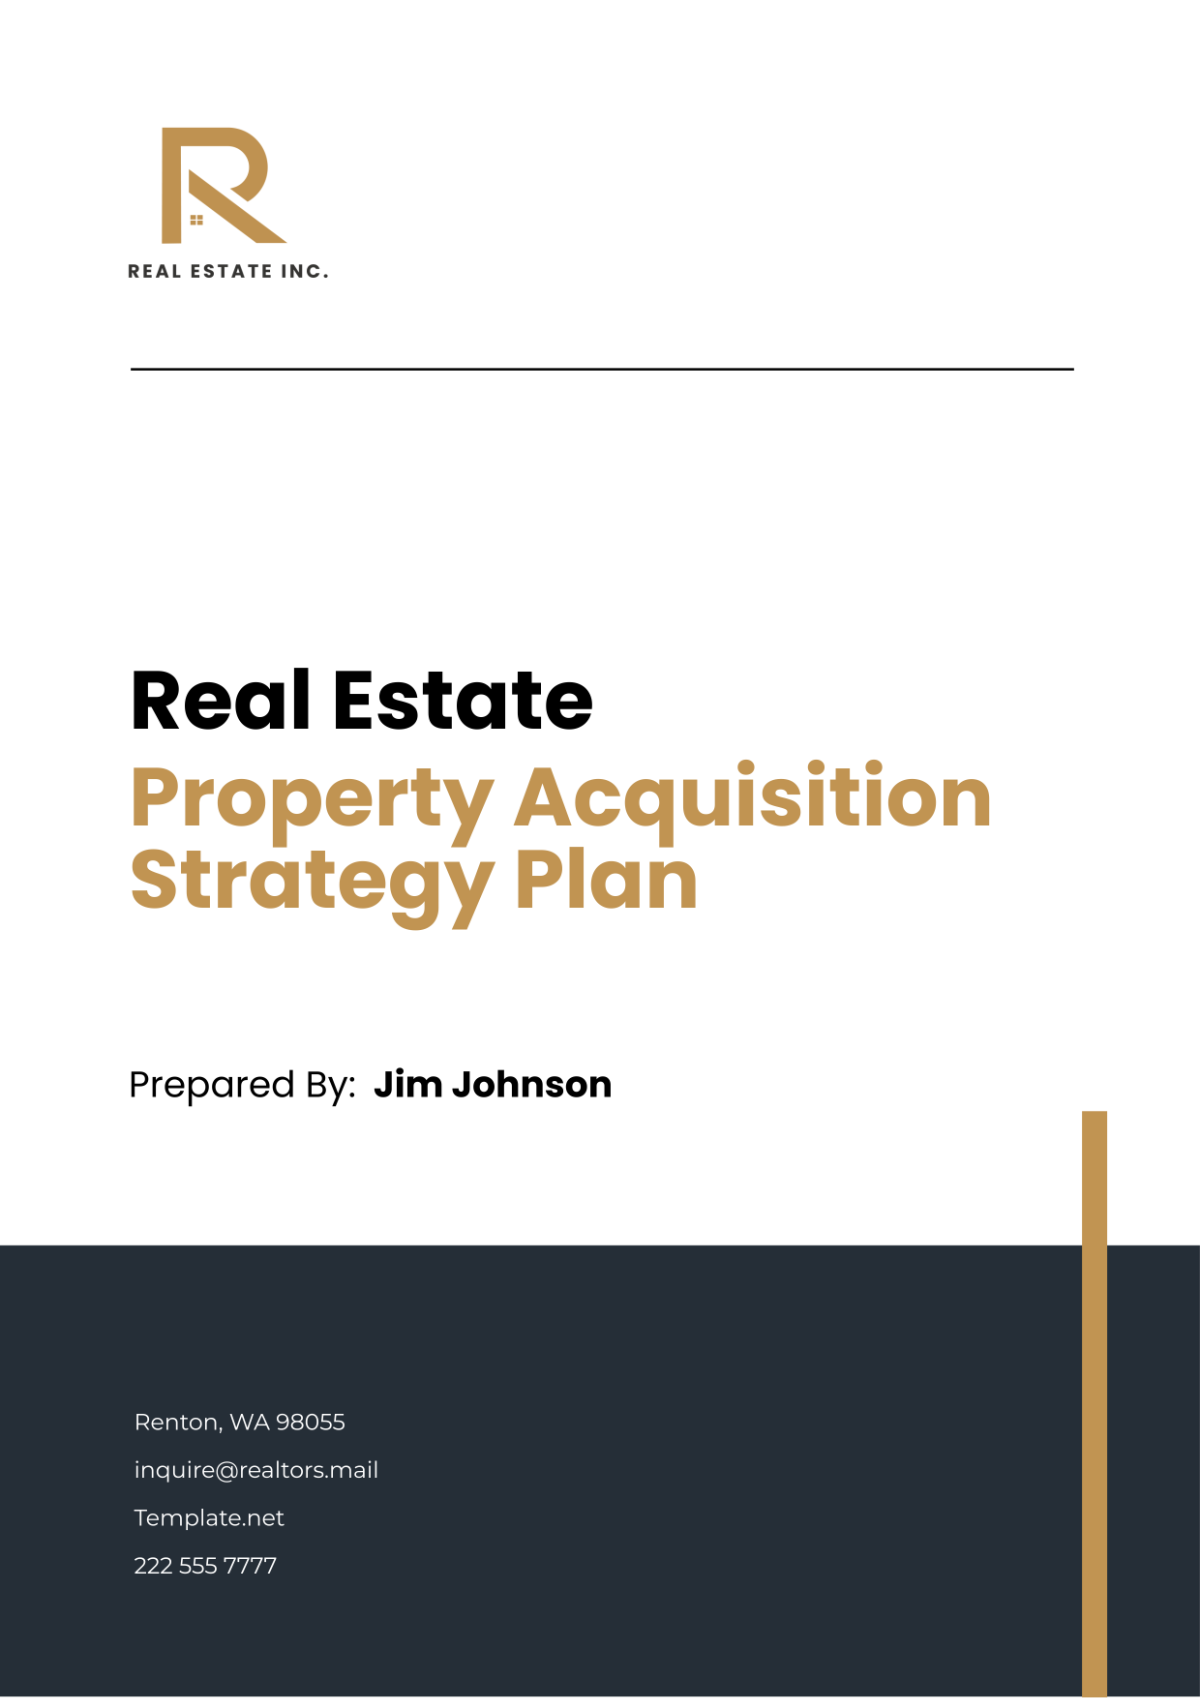 Free Real Estate Property Acquisition Strategy Plan Template